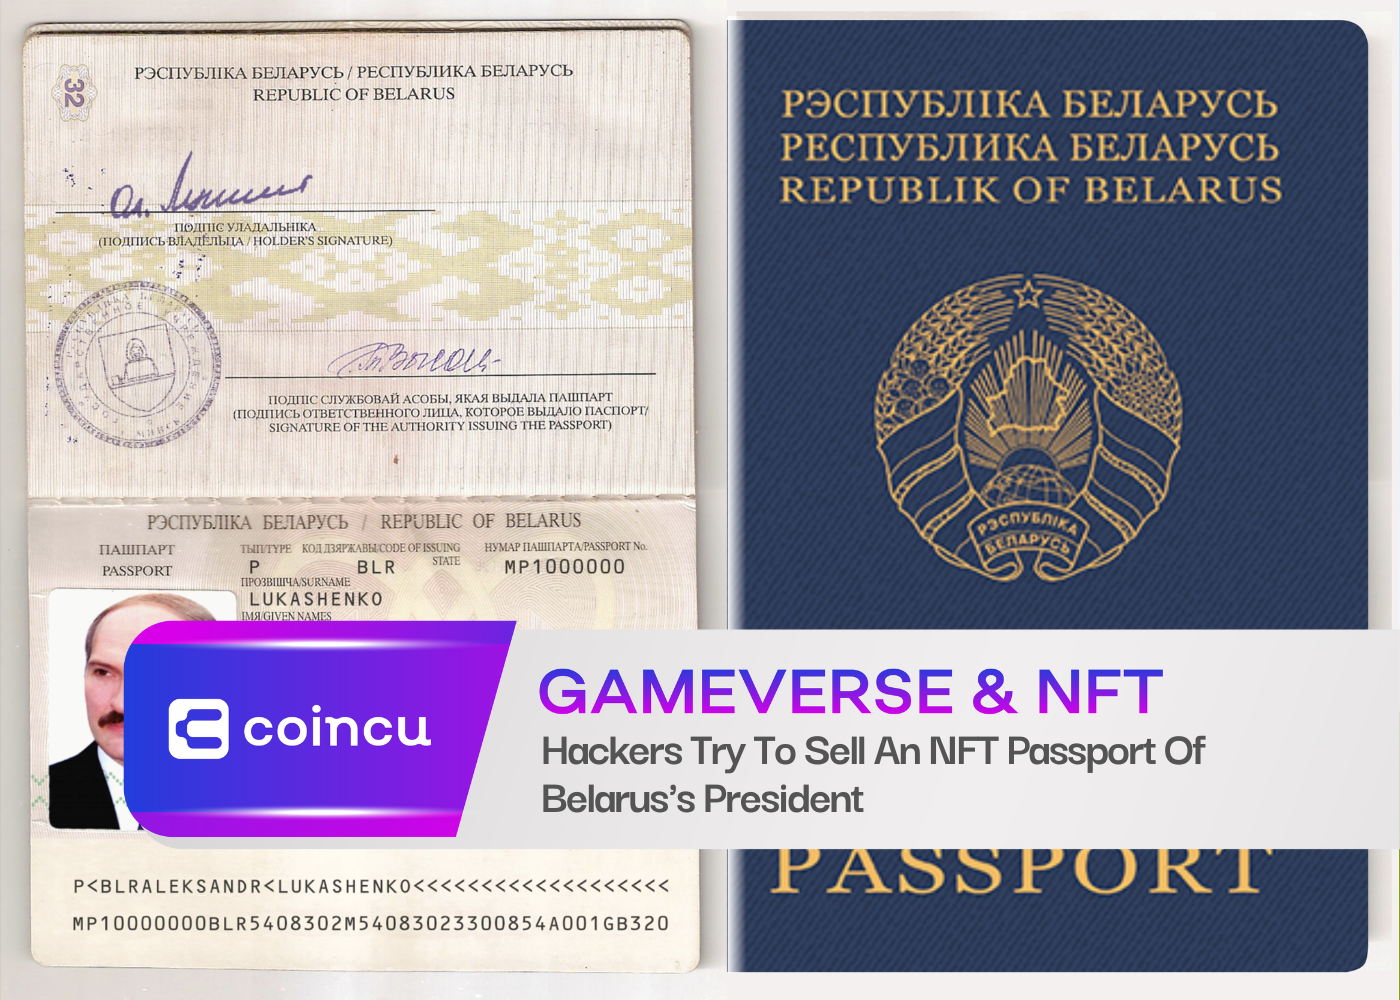 Hackers Try To Sell An NFT Passport Of Belarus's President